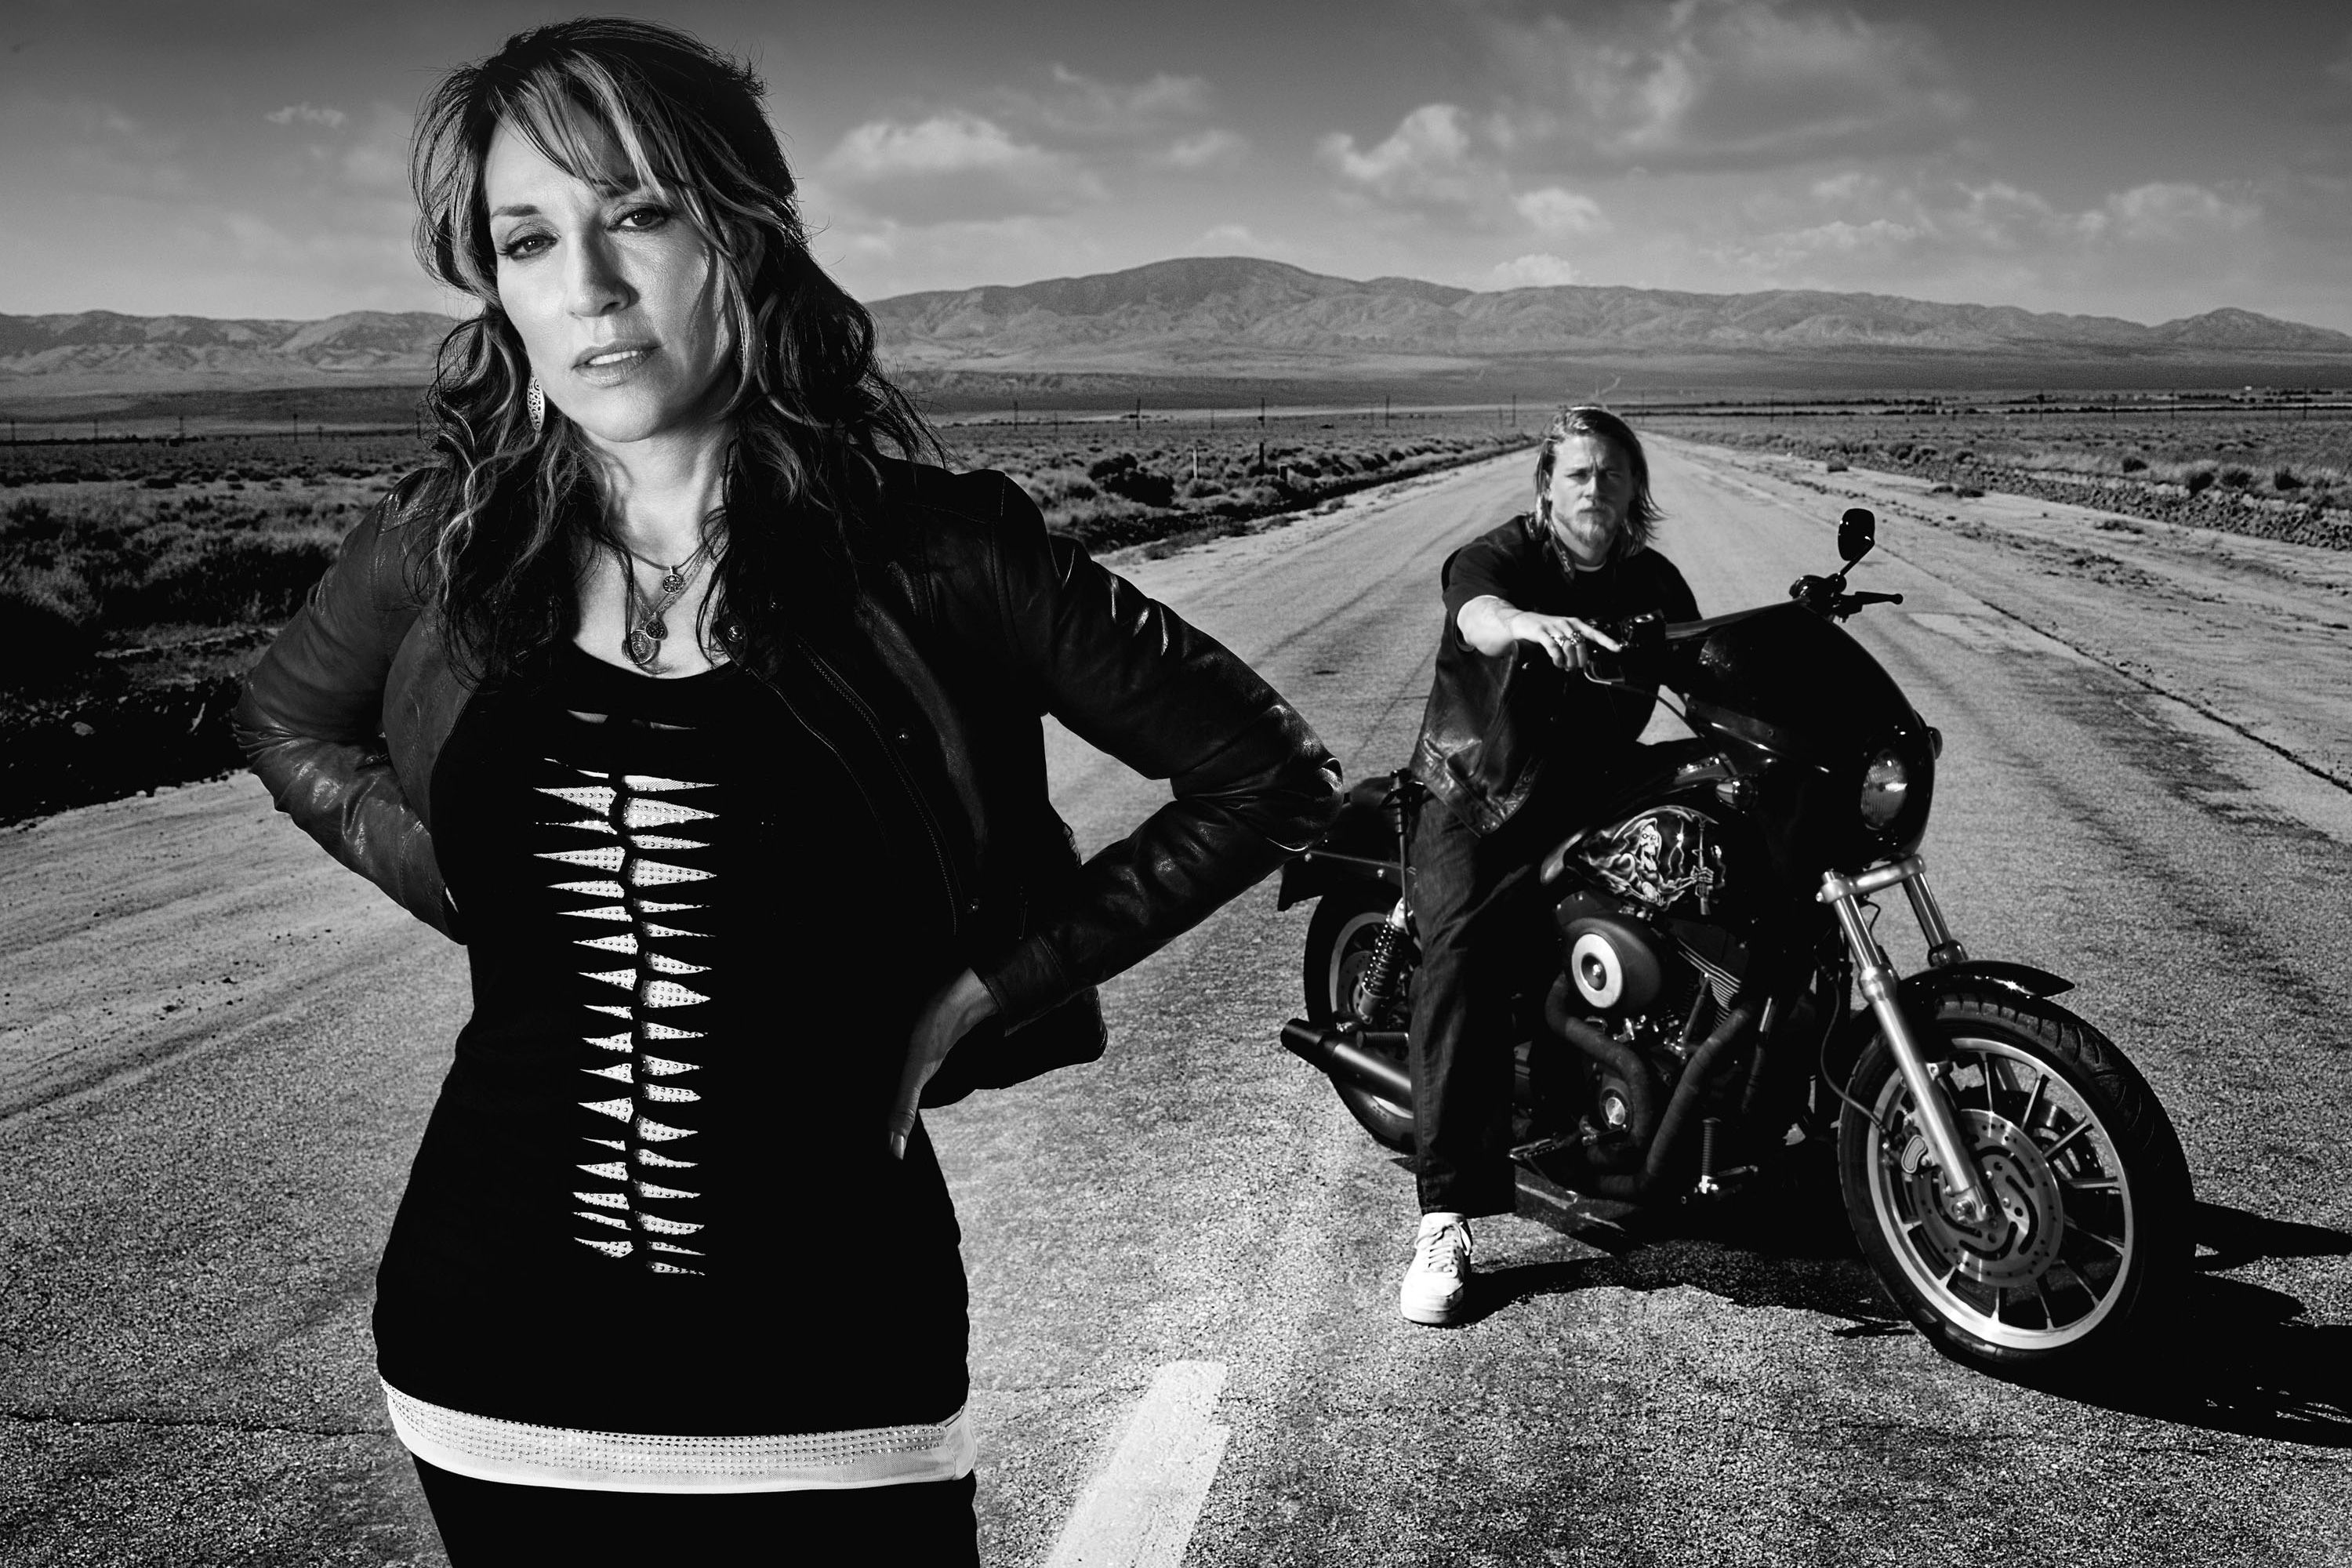 Katey Segal in Sons of Anarchy